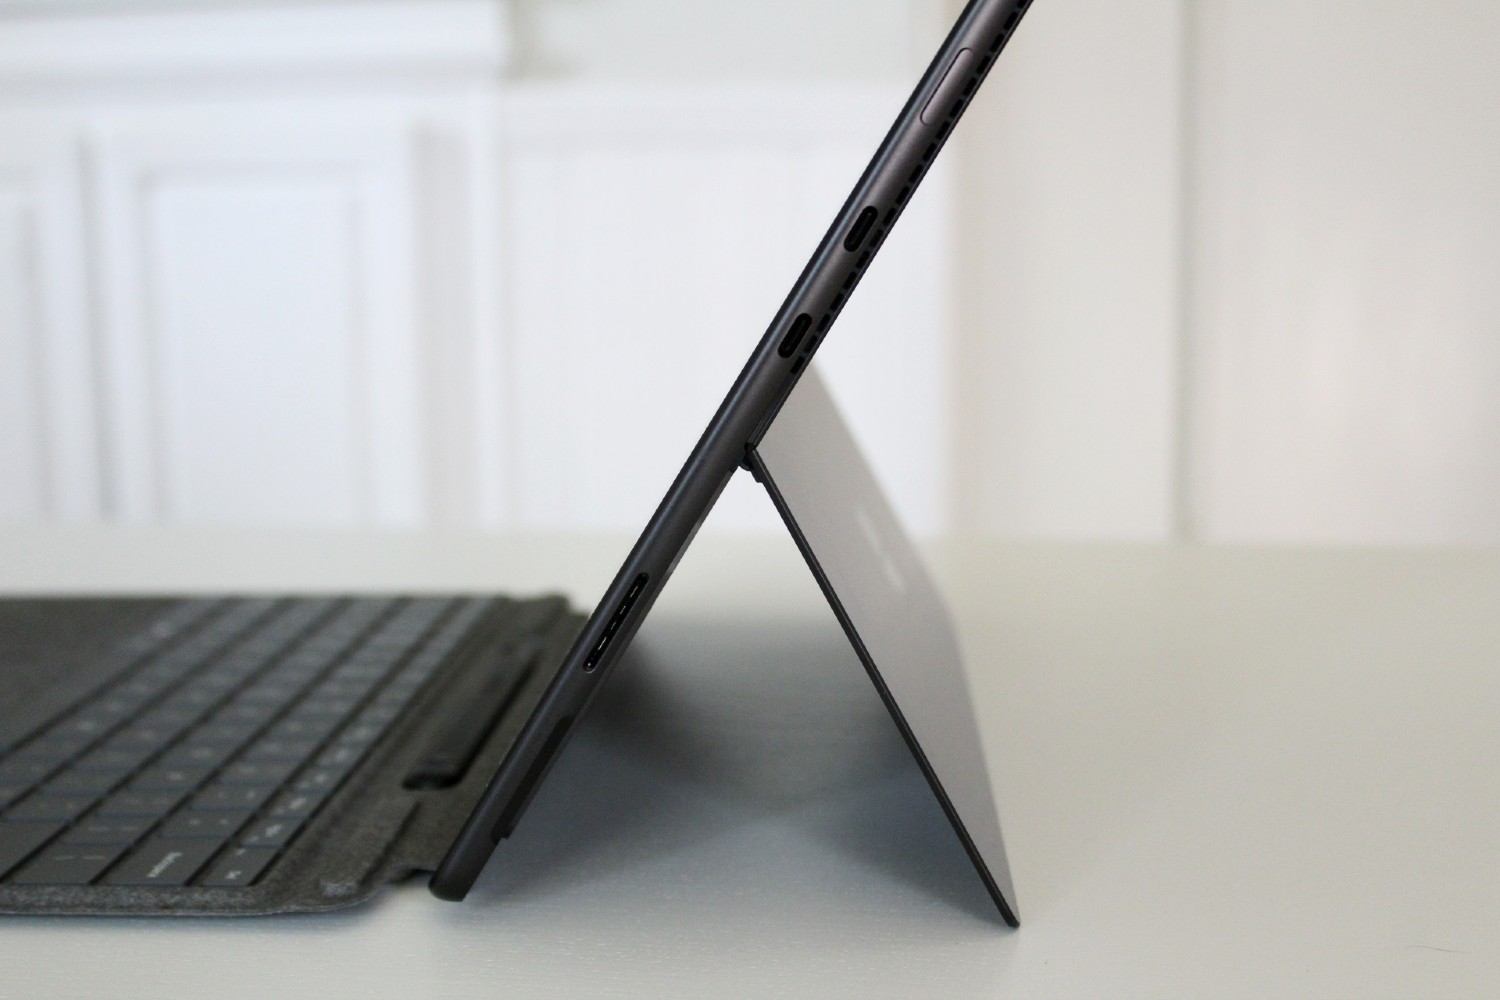 The Surface Pro 8 with kickstand.